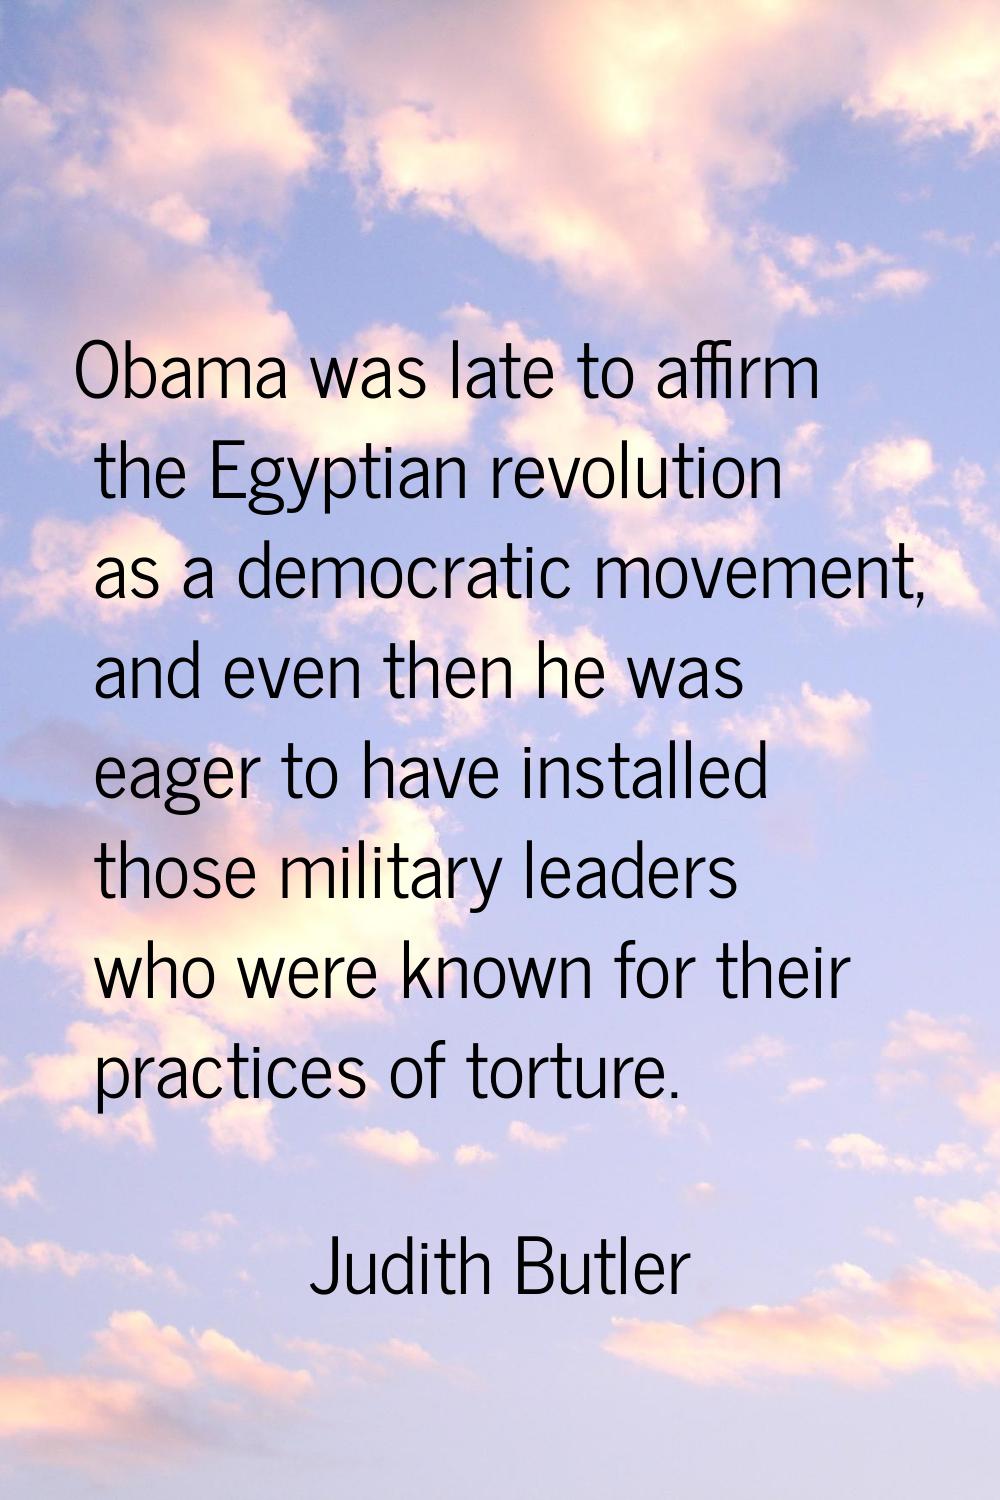 Obama was late to affirm the Egyptian revolution as a democratic movement, and even then he was eag